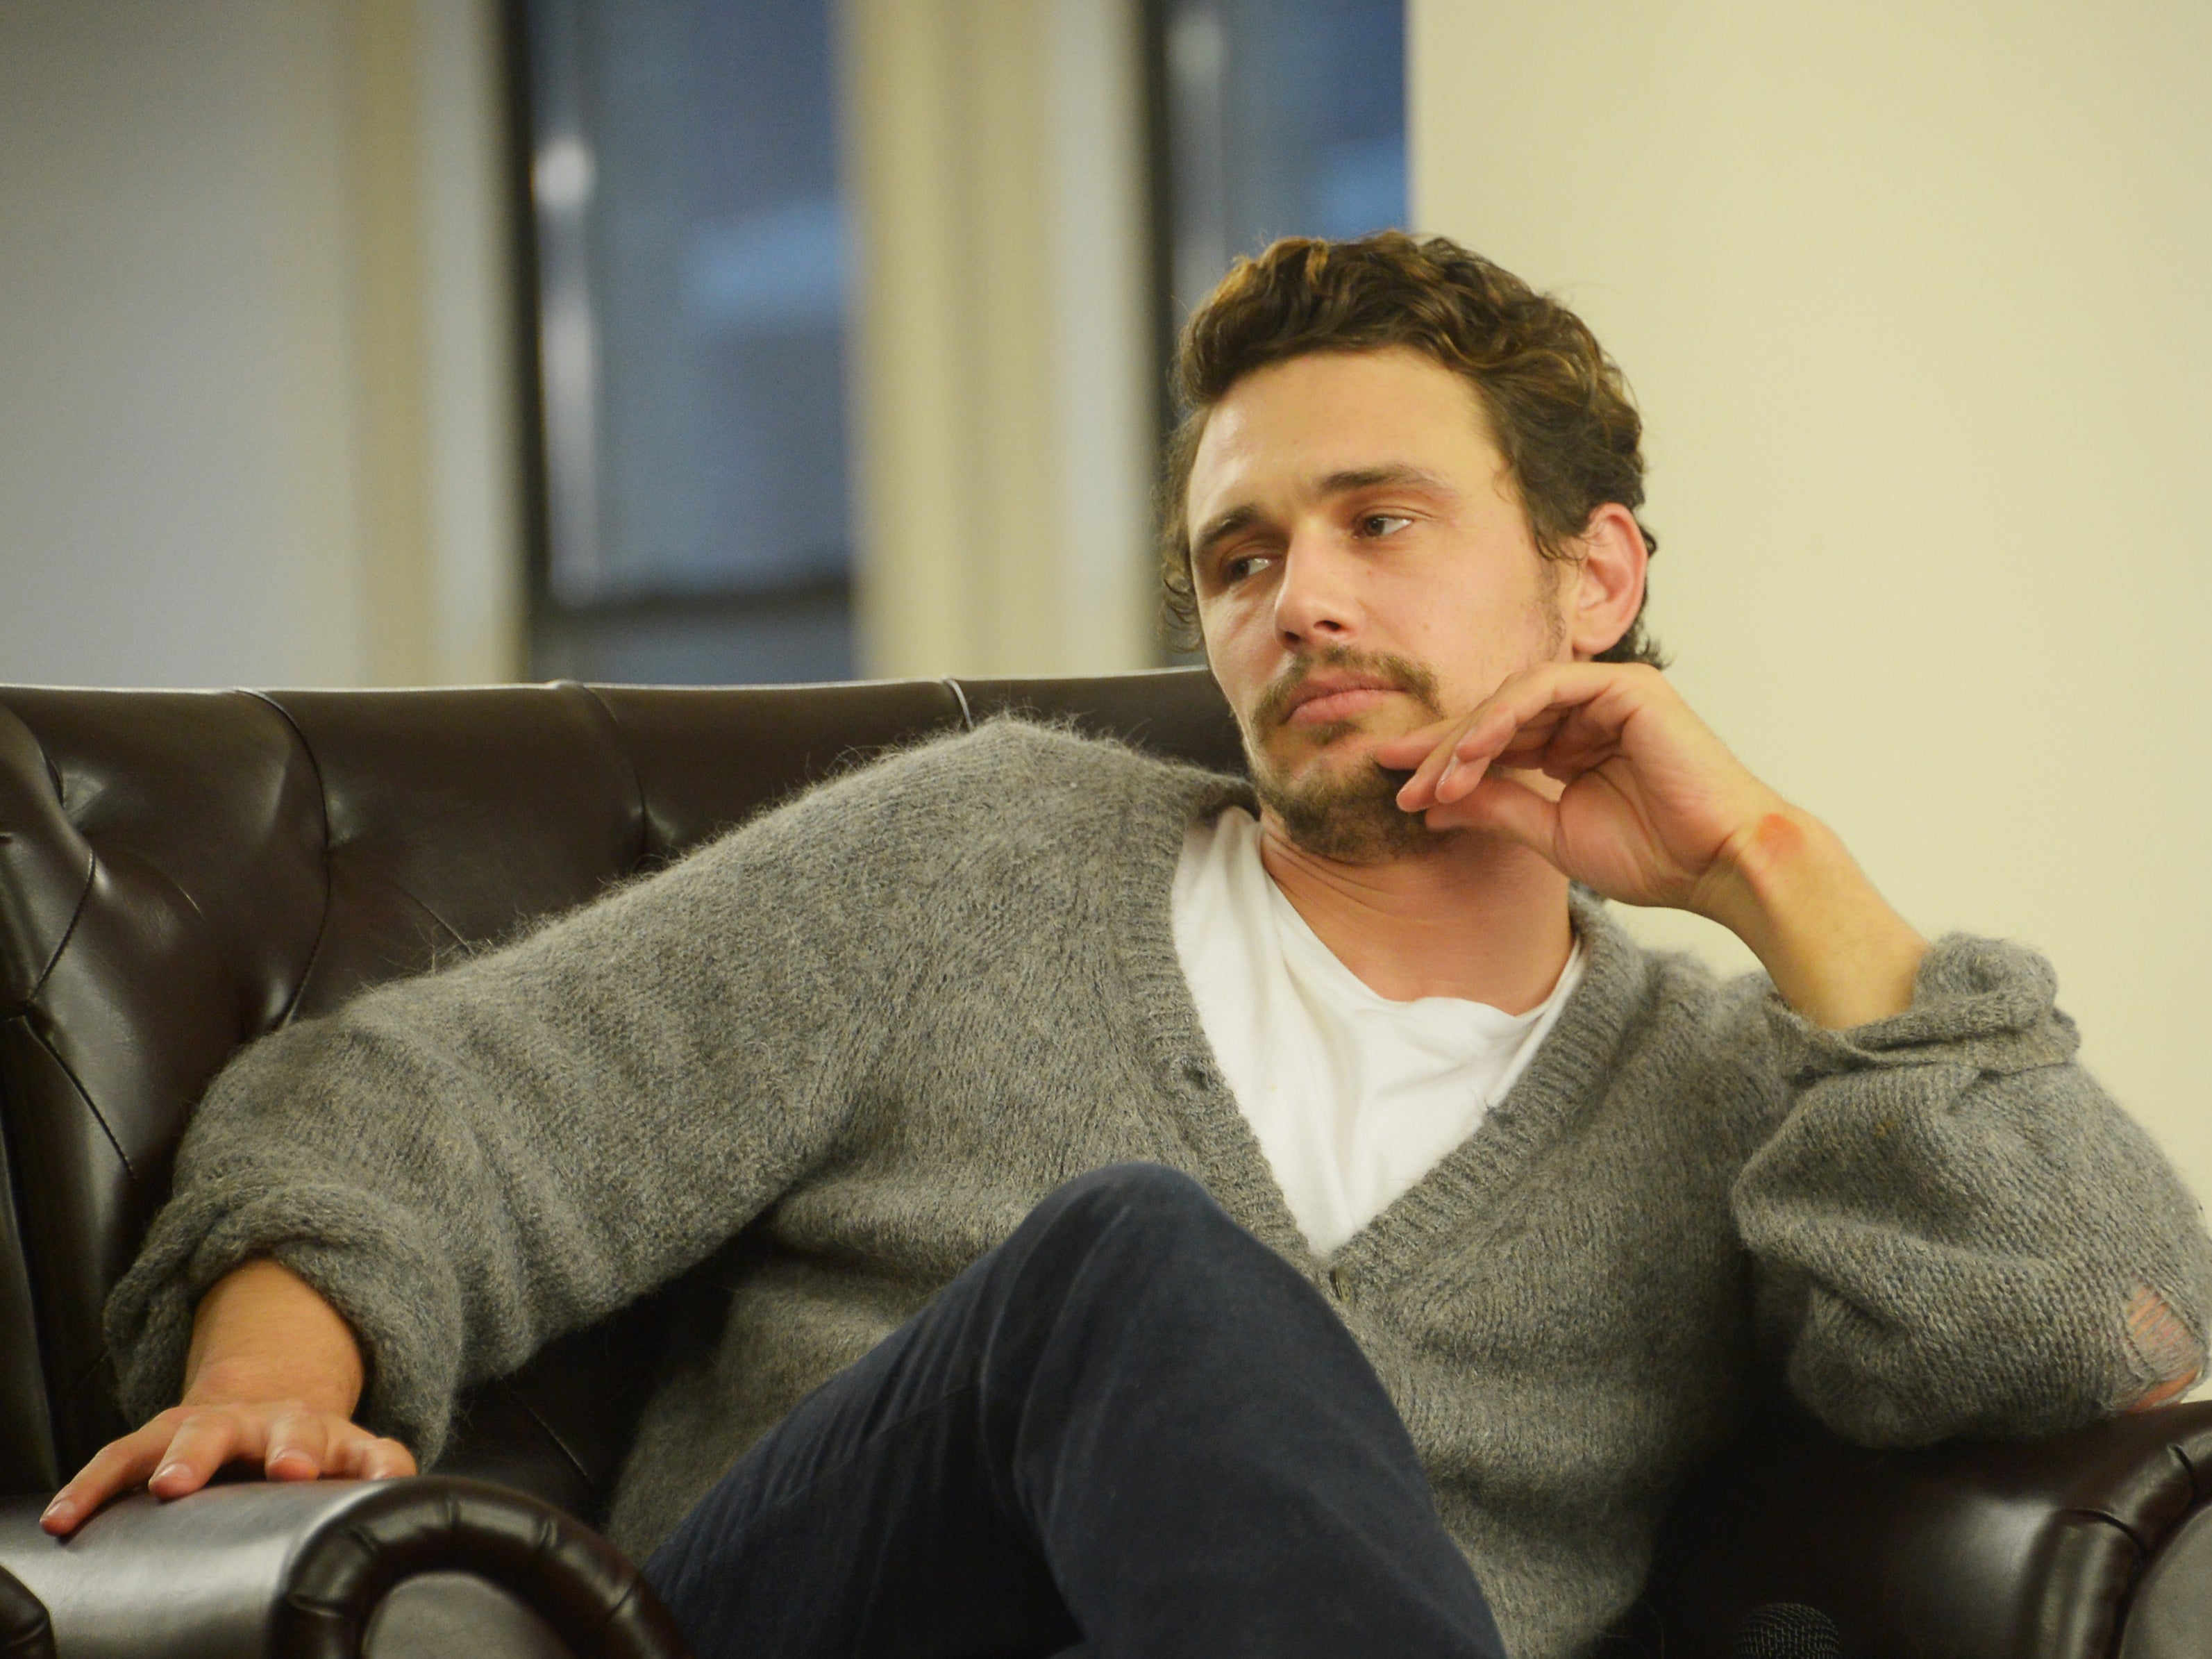 James Franco gave an interview in which he admitted to sleeping with his acting students